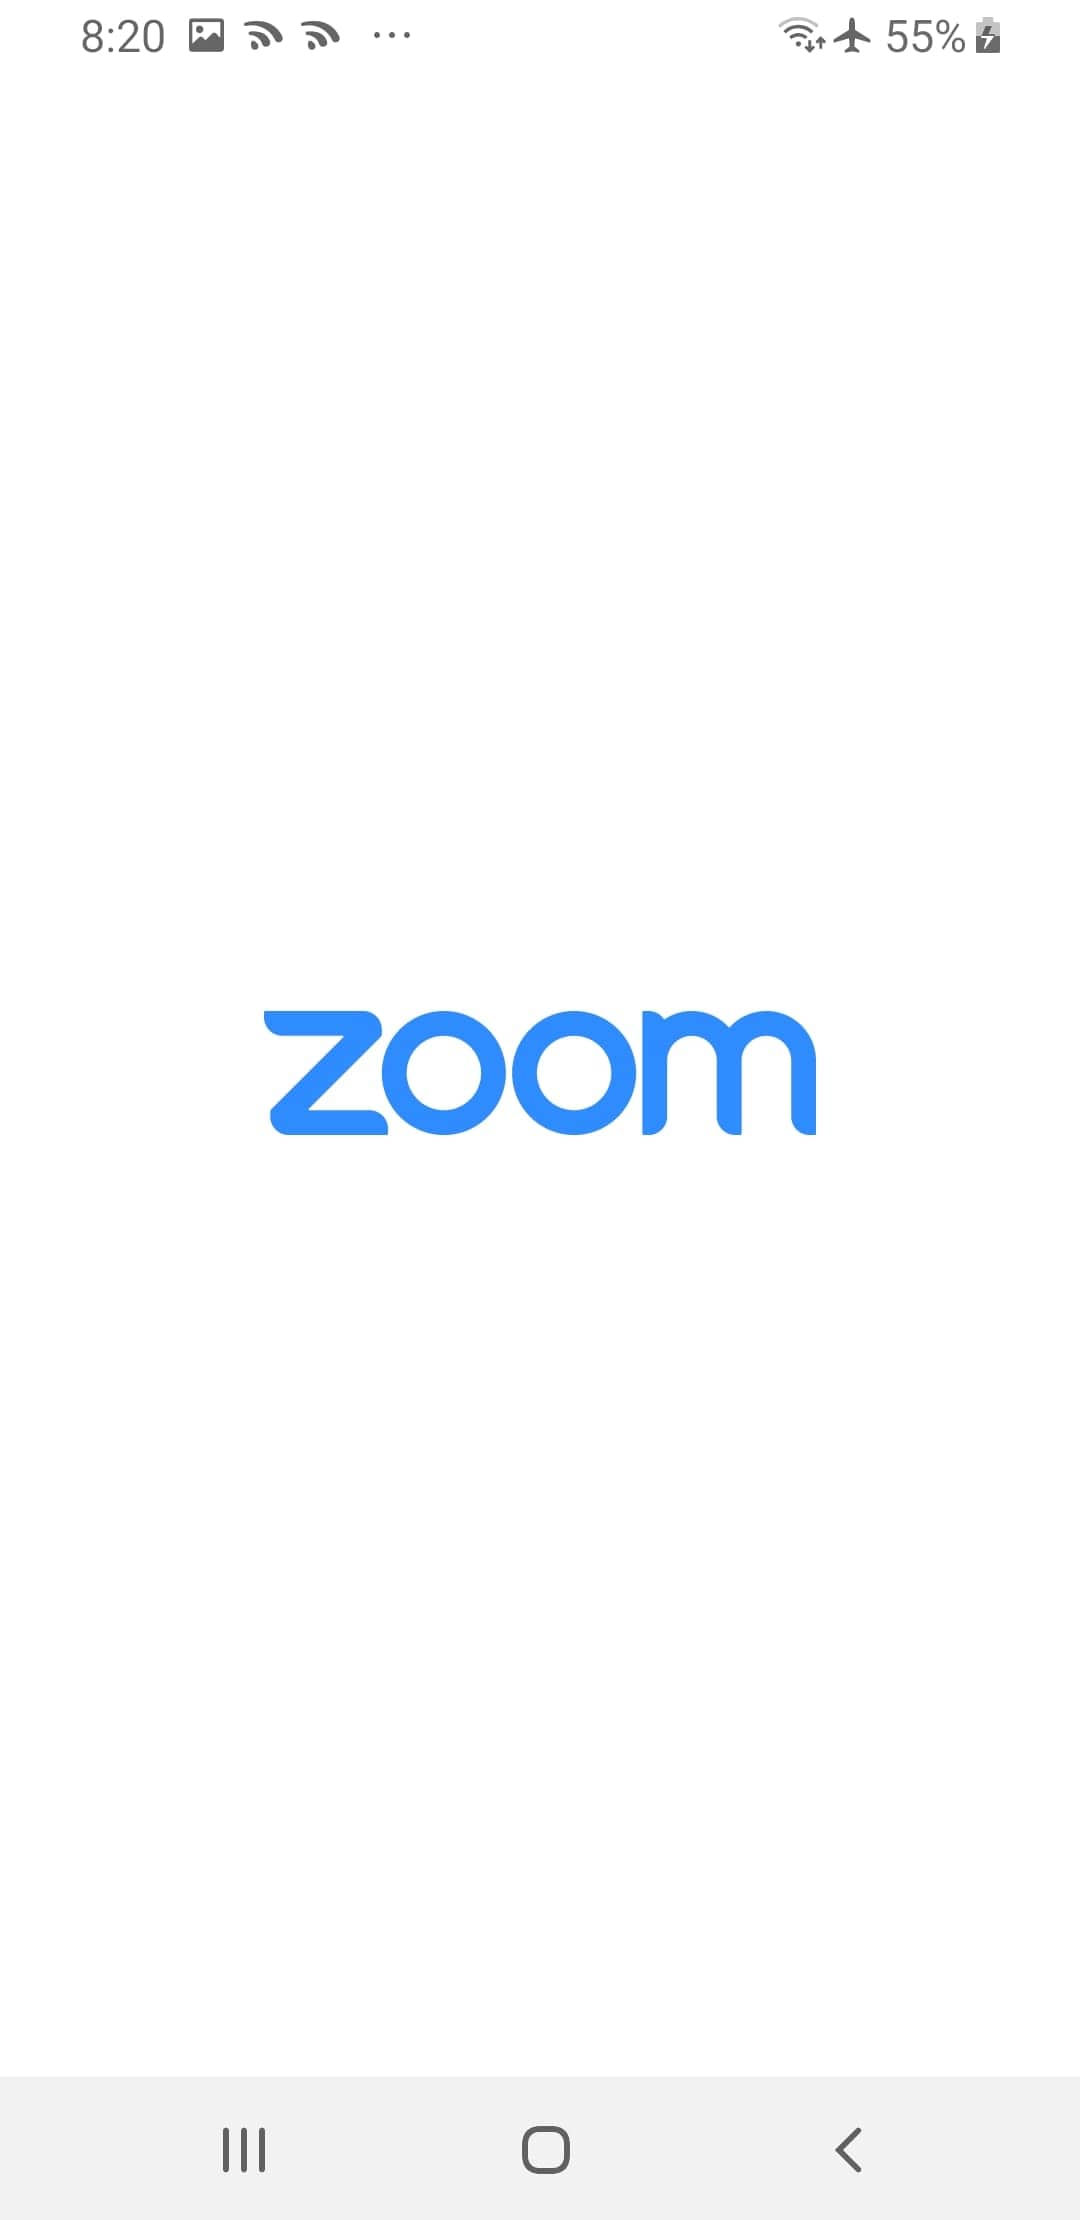 Screenshot From Our Zoom - One Platform to Connect Review